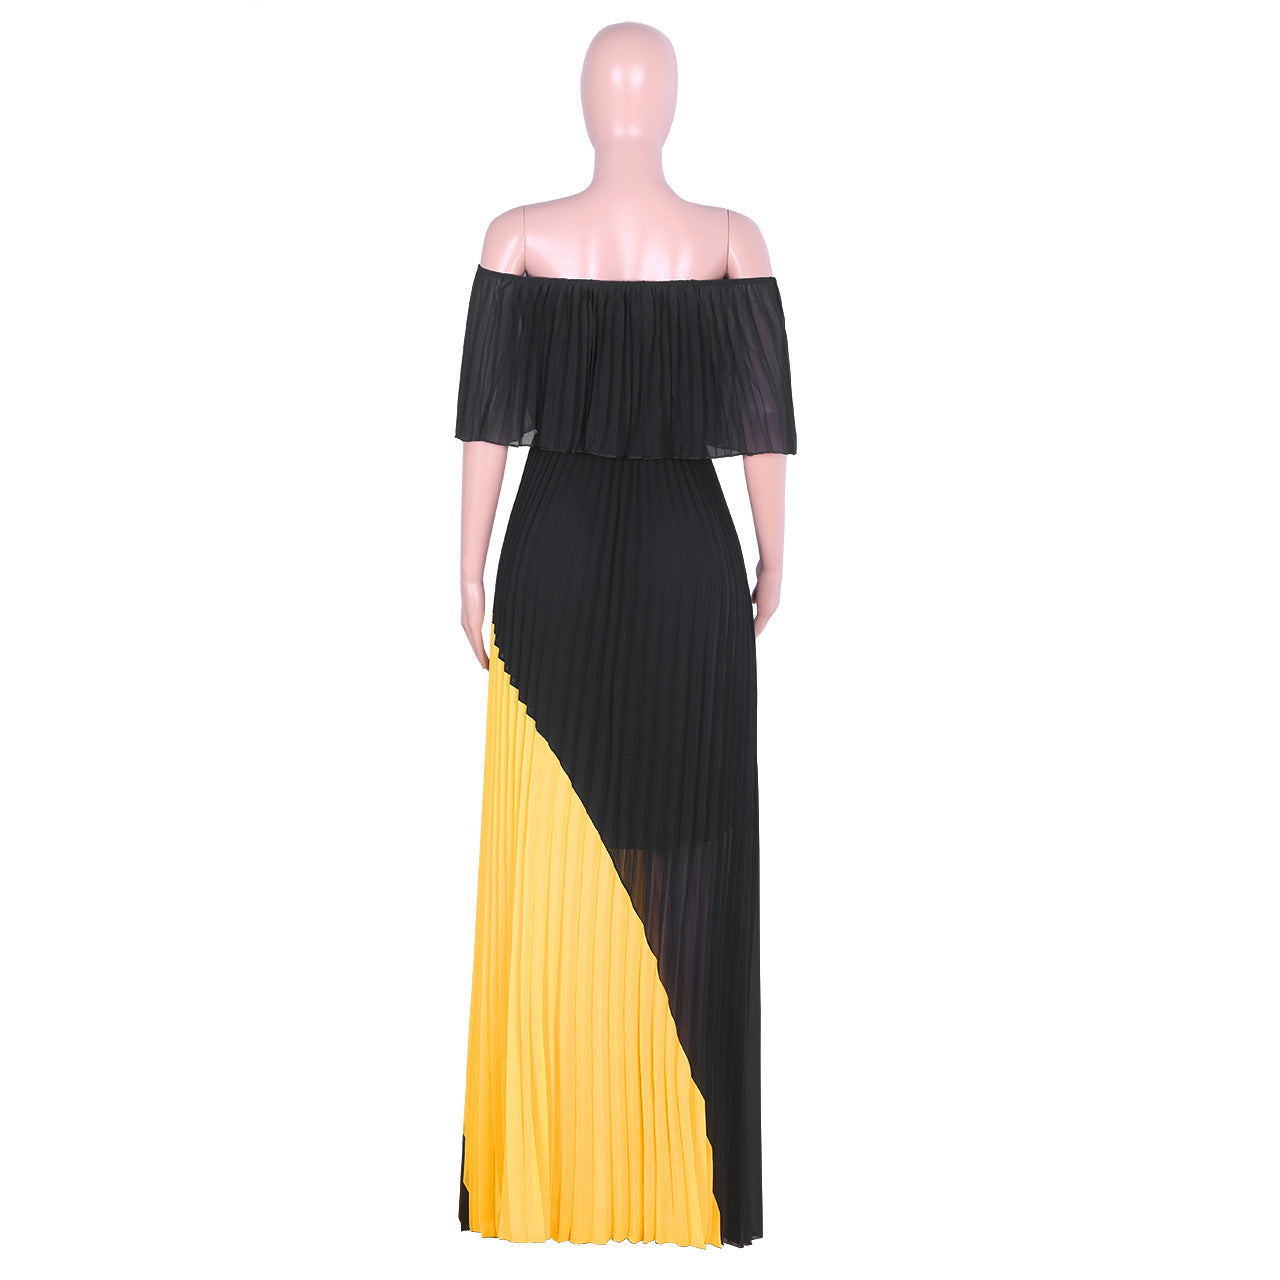 High-end Pleated Patchwork Long Classy Off Shoulder Maxi African Dress - GORGEOUS 271, LLC 